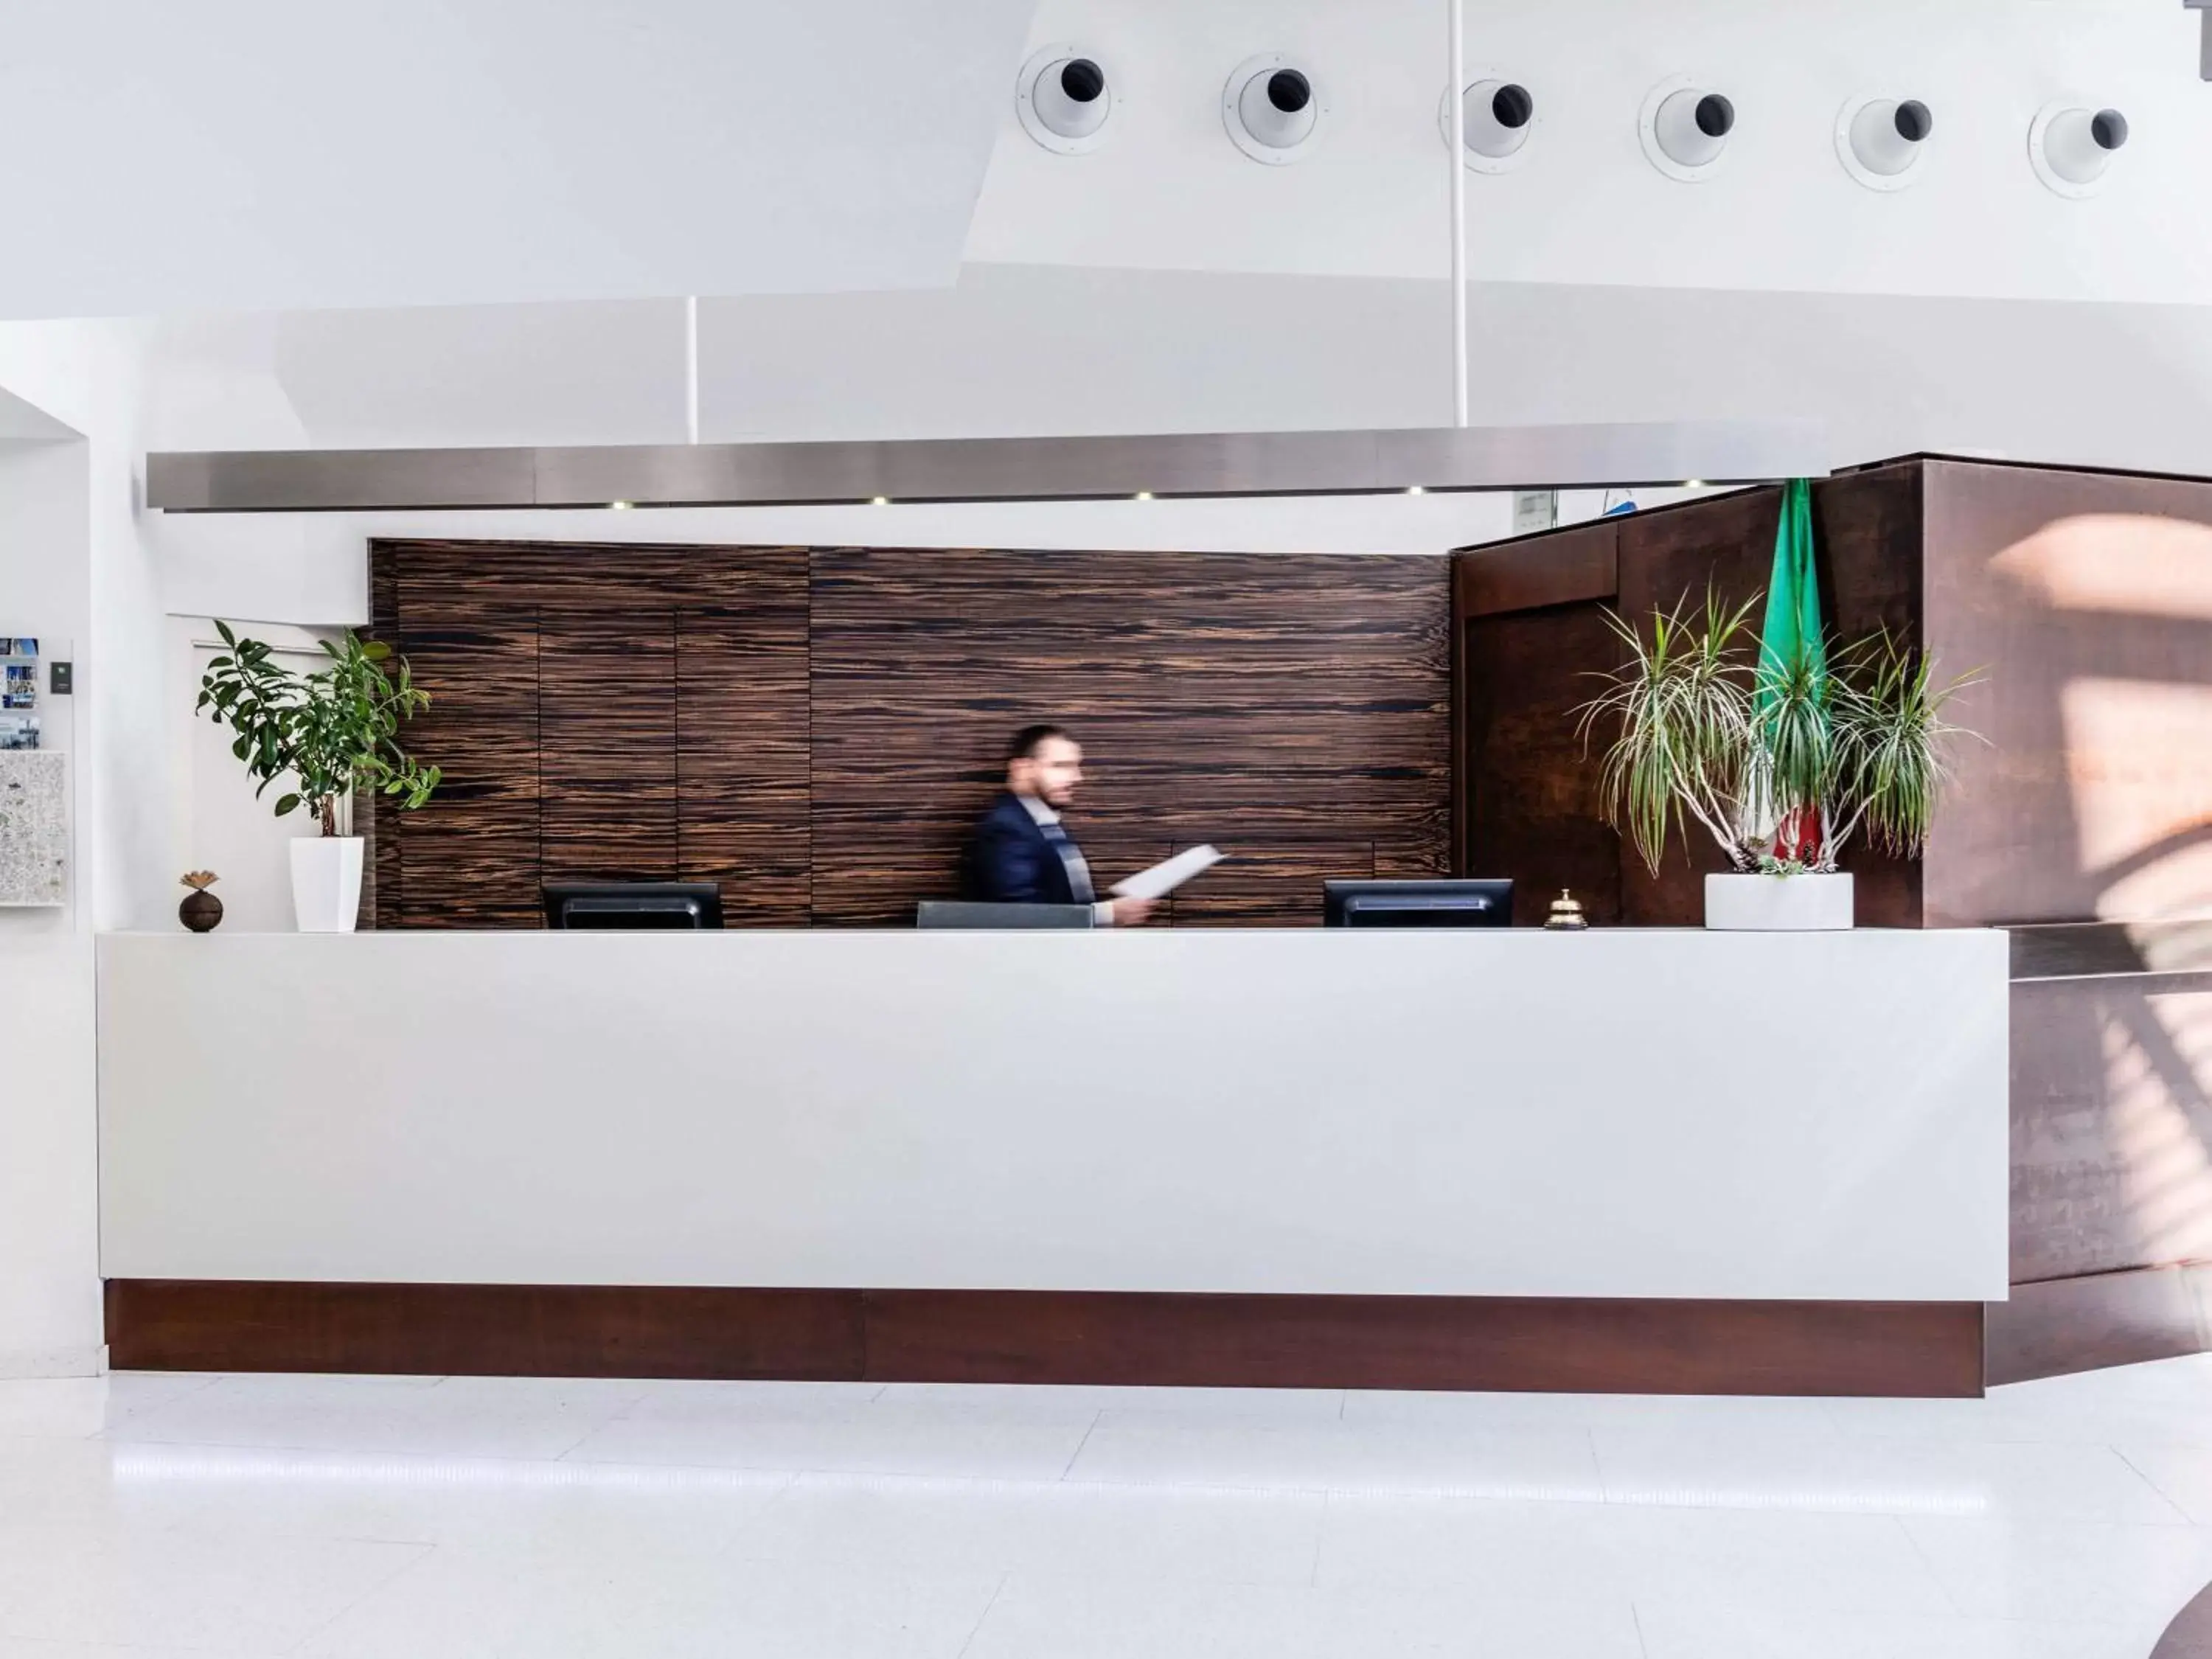 On site, Lobby/Reception in Ibis Styles Milano Centro